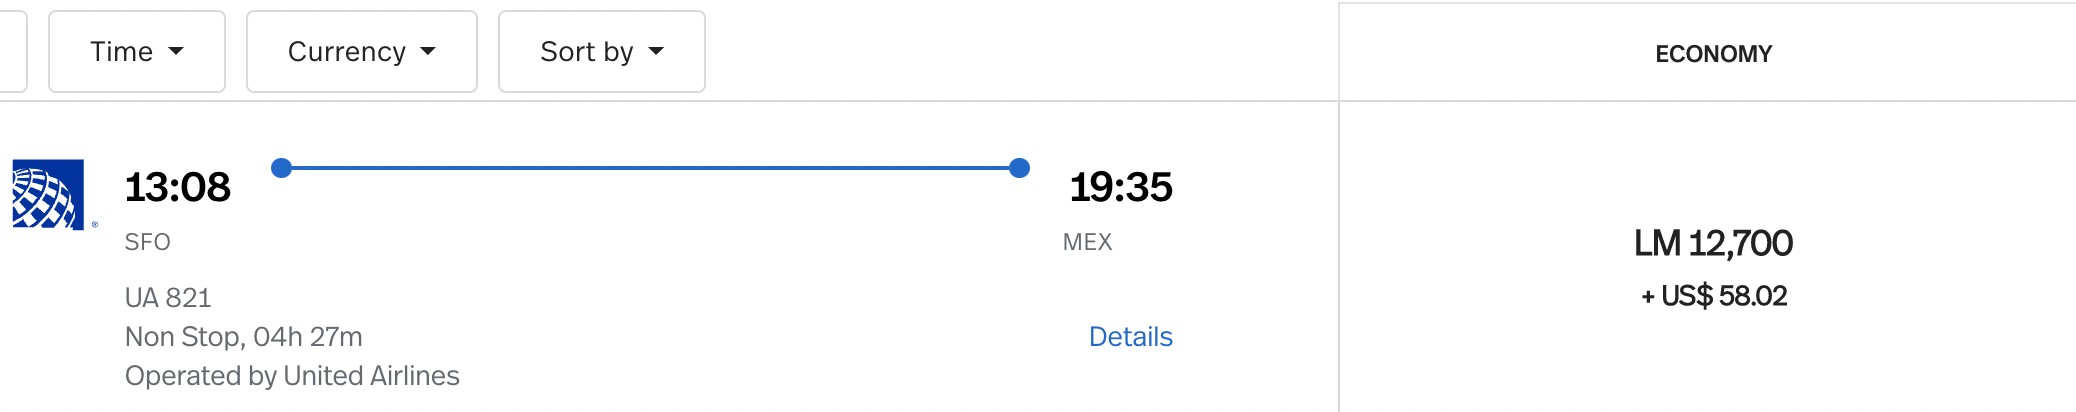 Booking a flight from SFO to MEX using LifeMiles